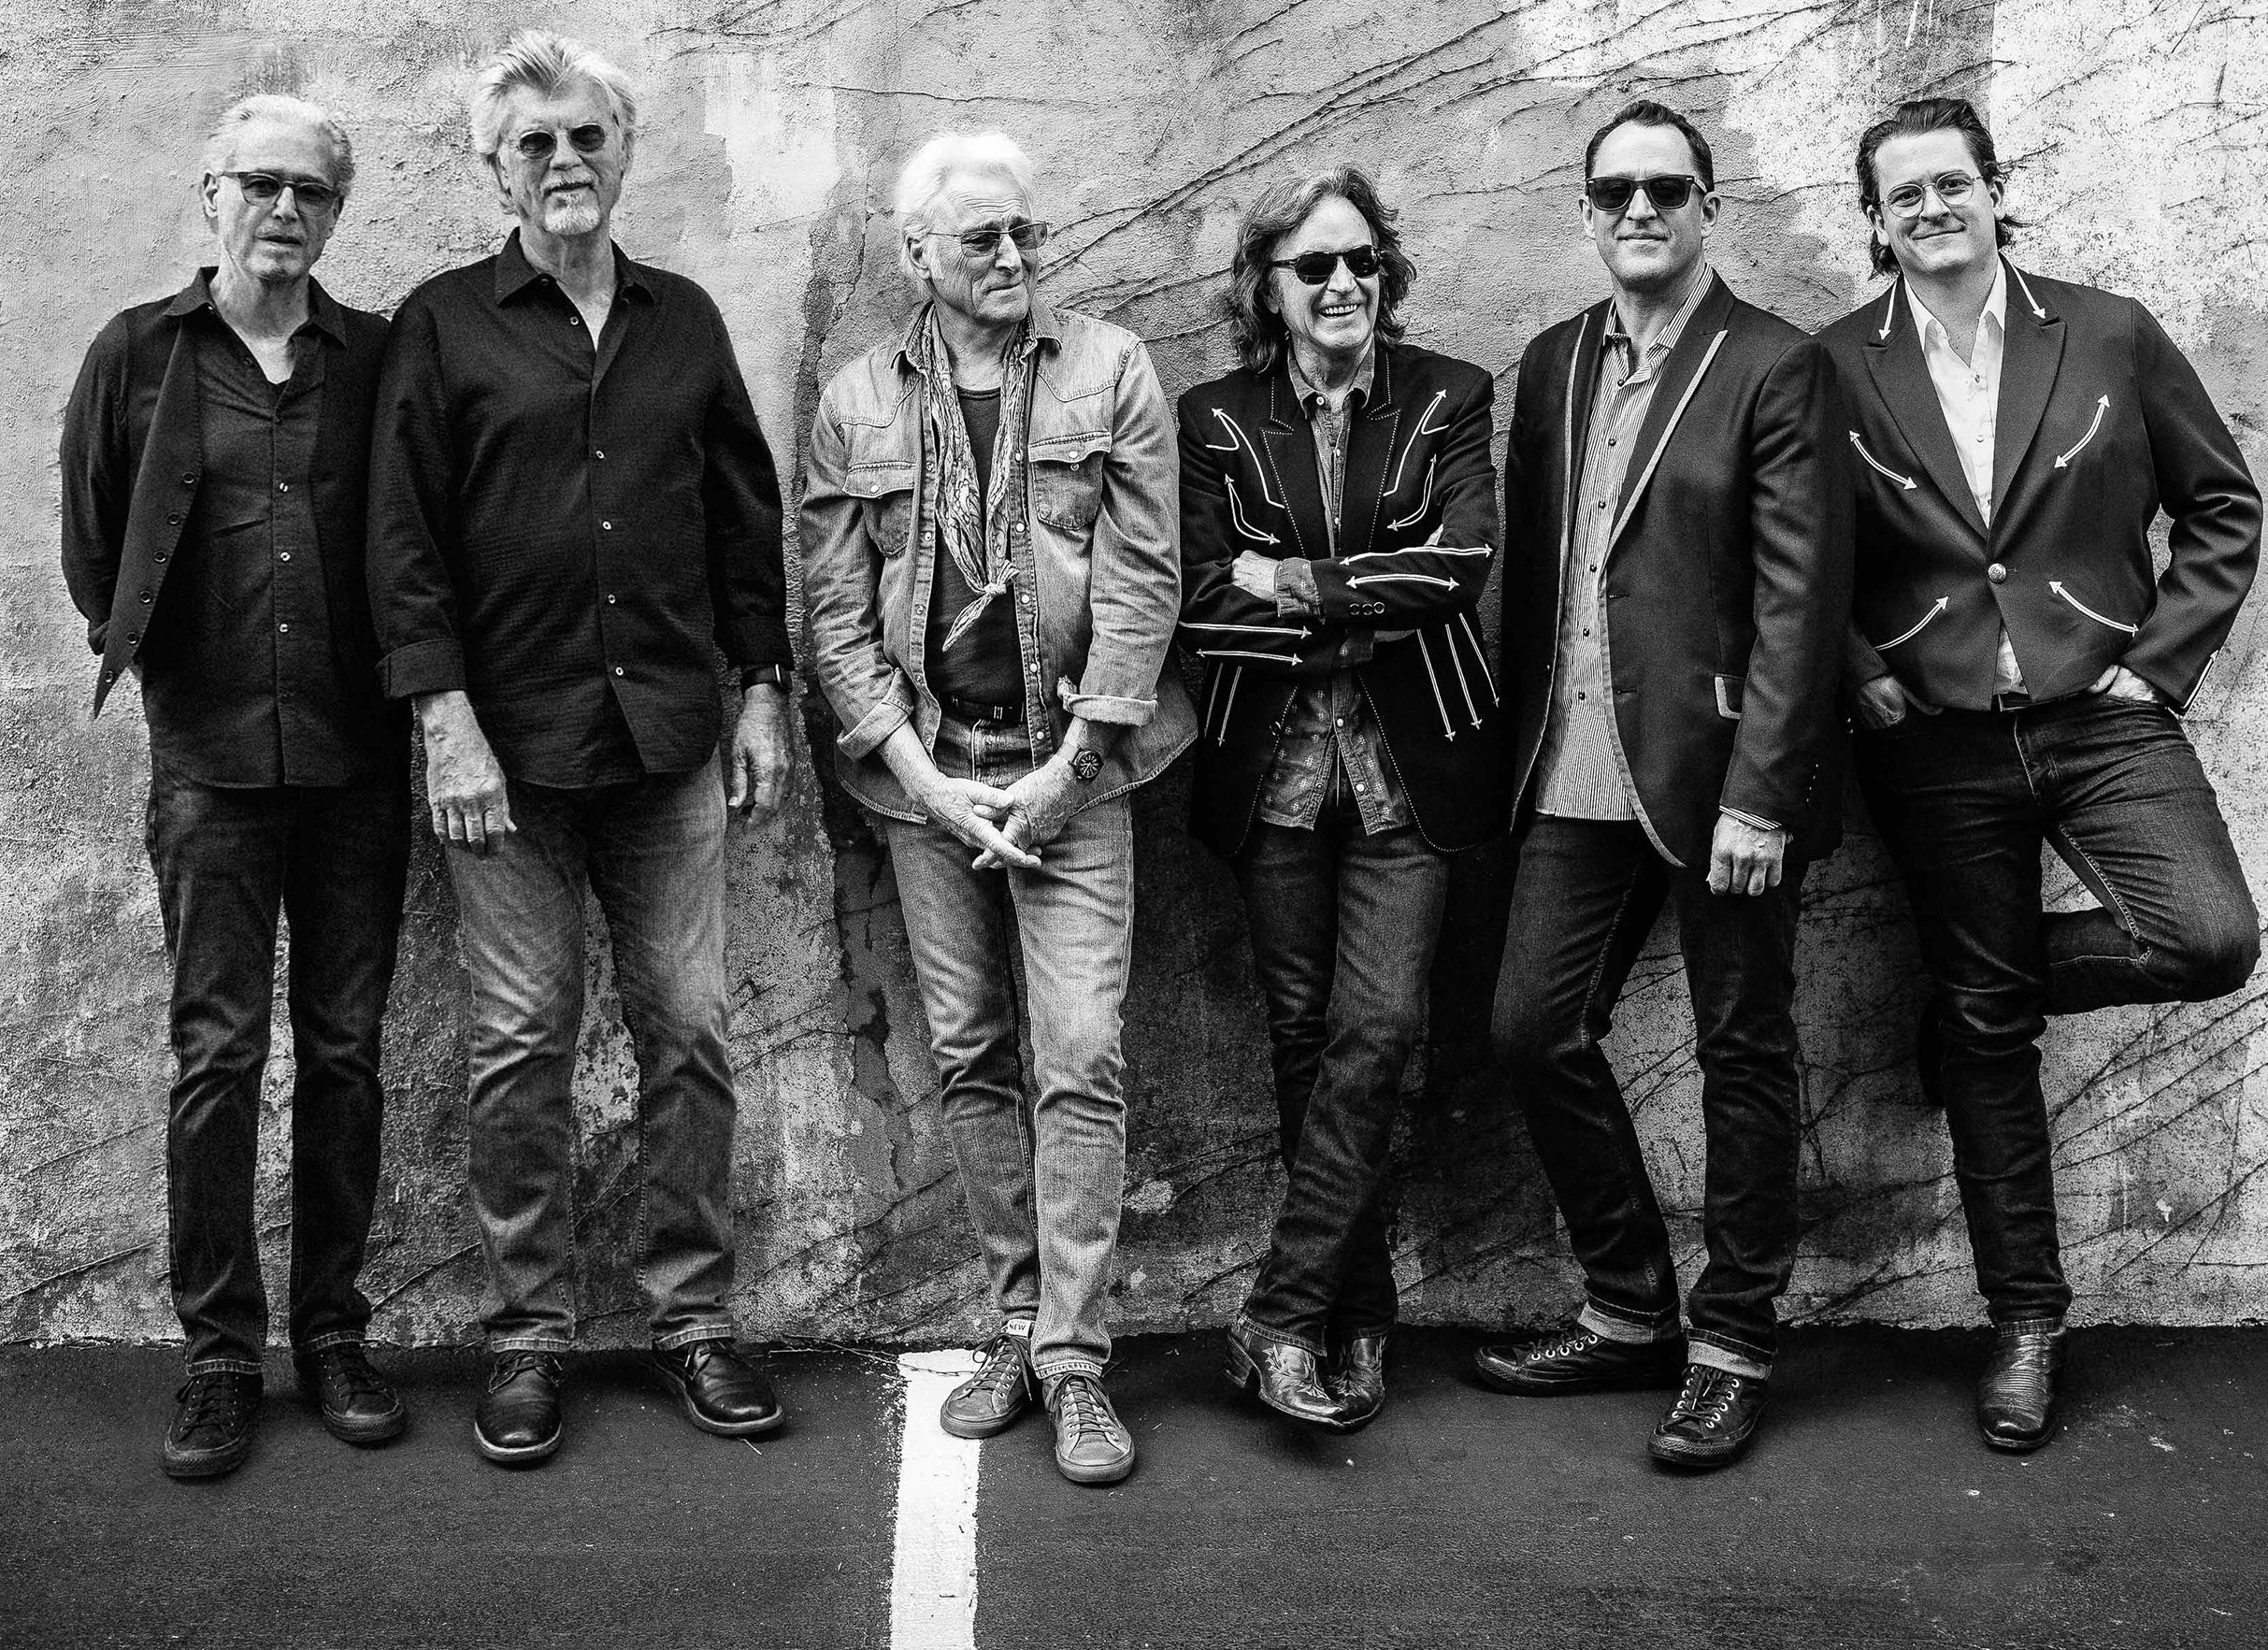 Nitty Gritty Dirt Band at the ALLIANCE